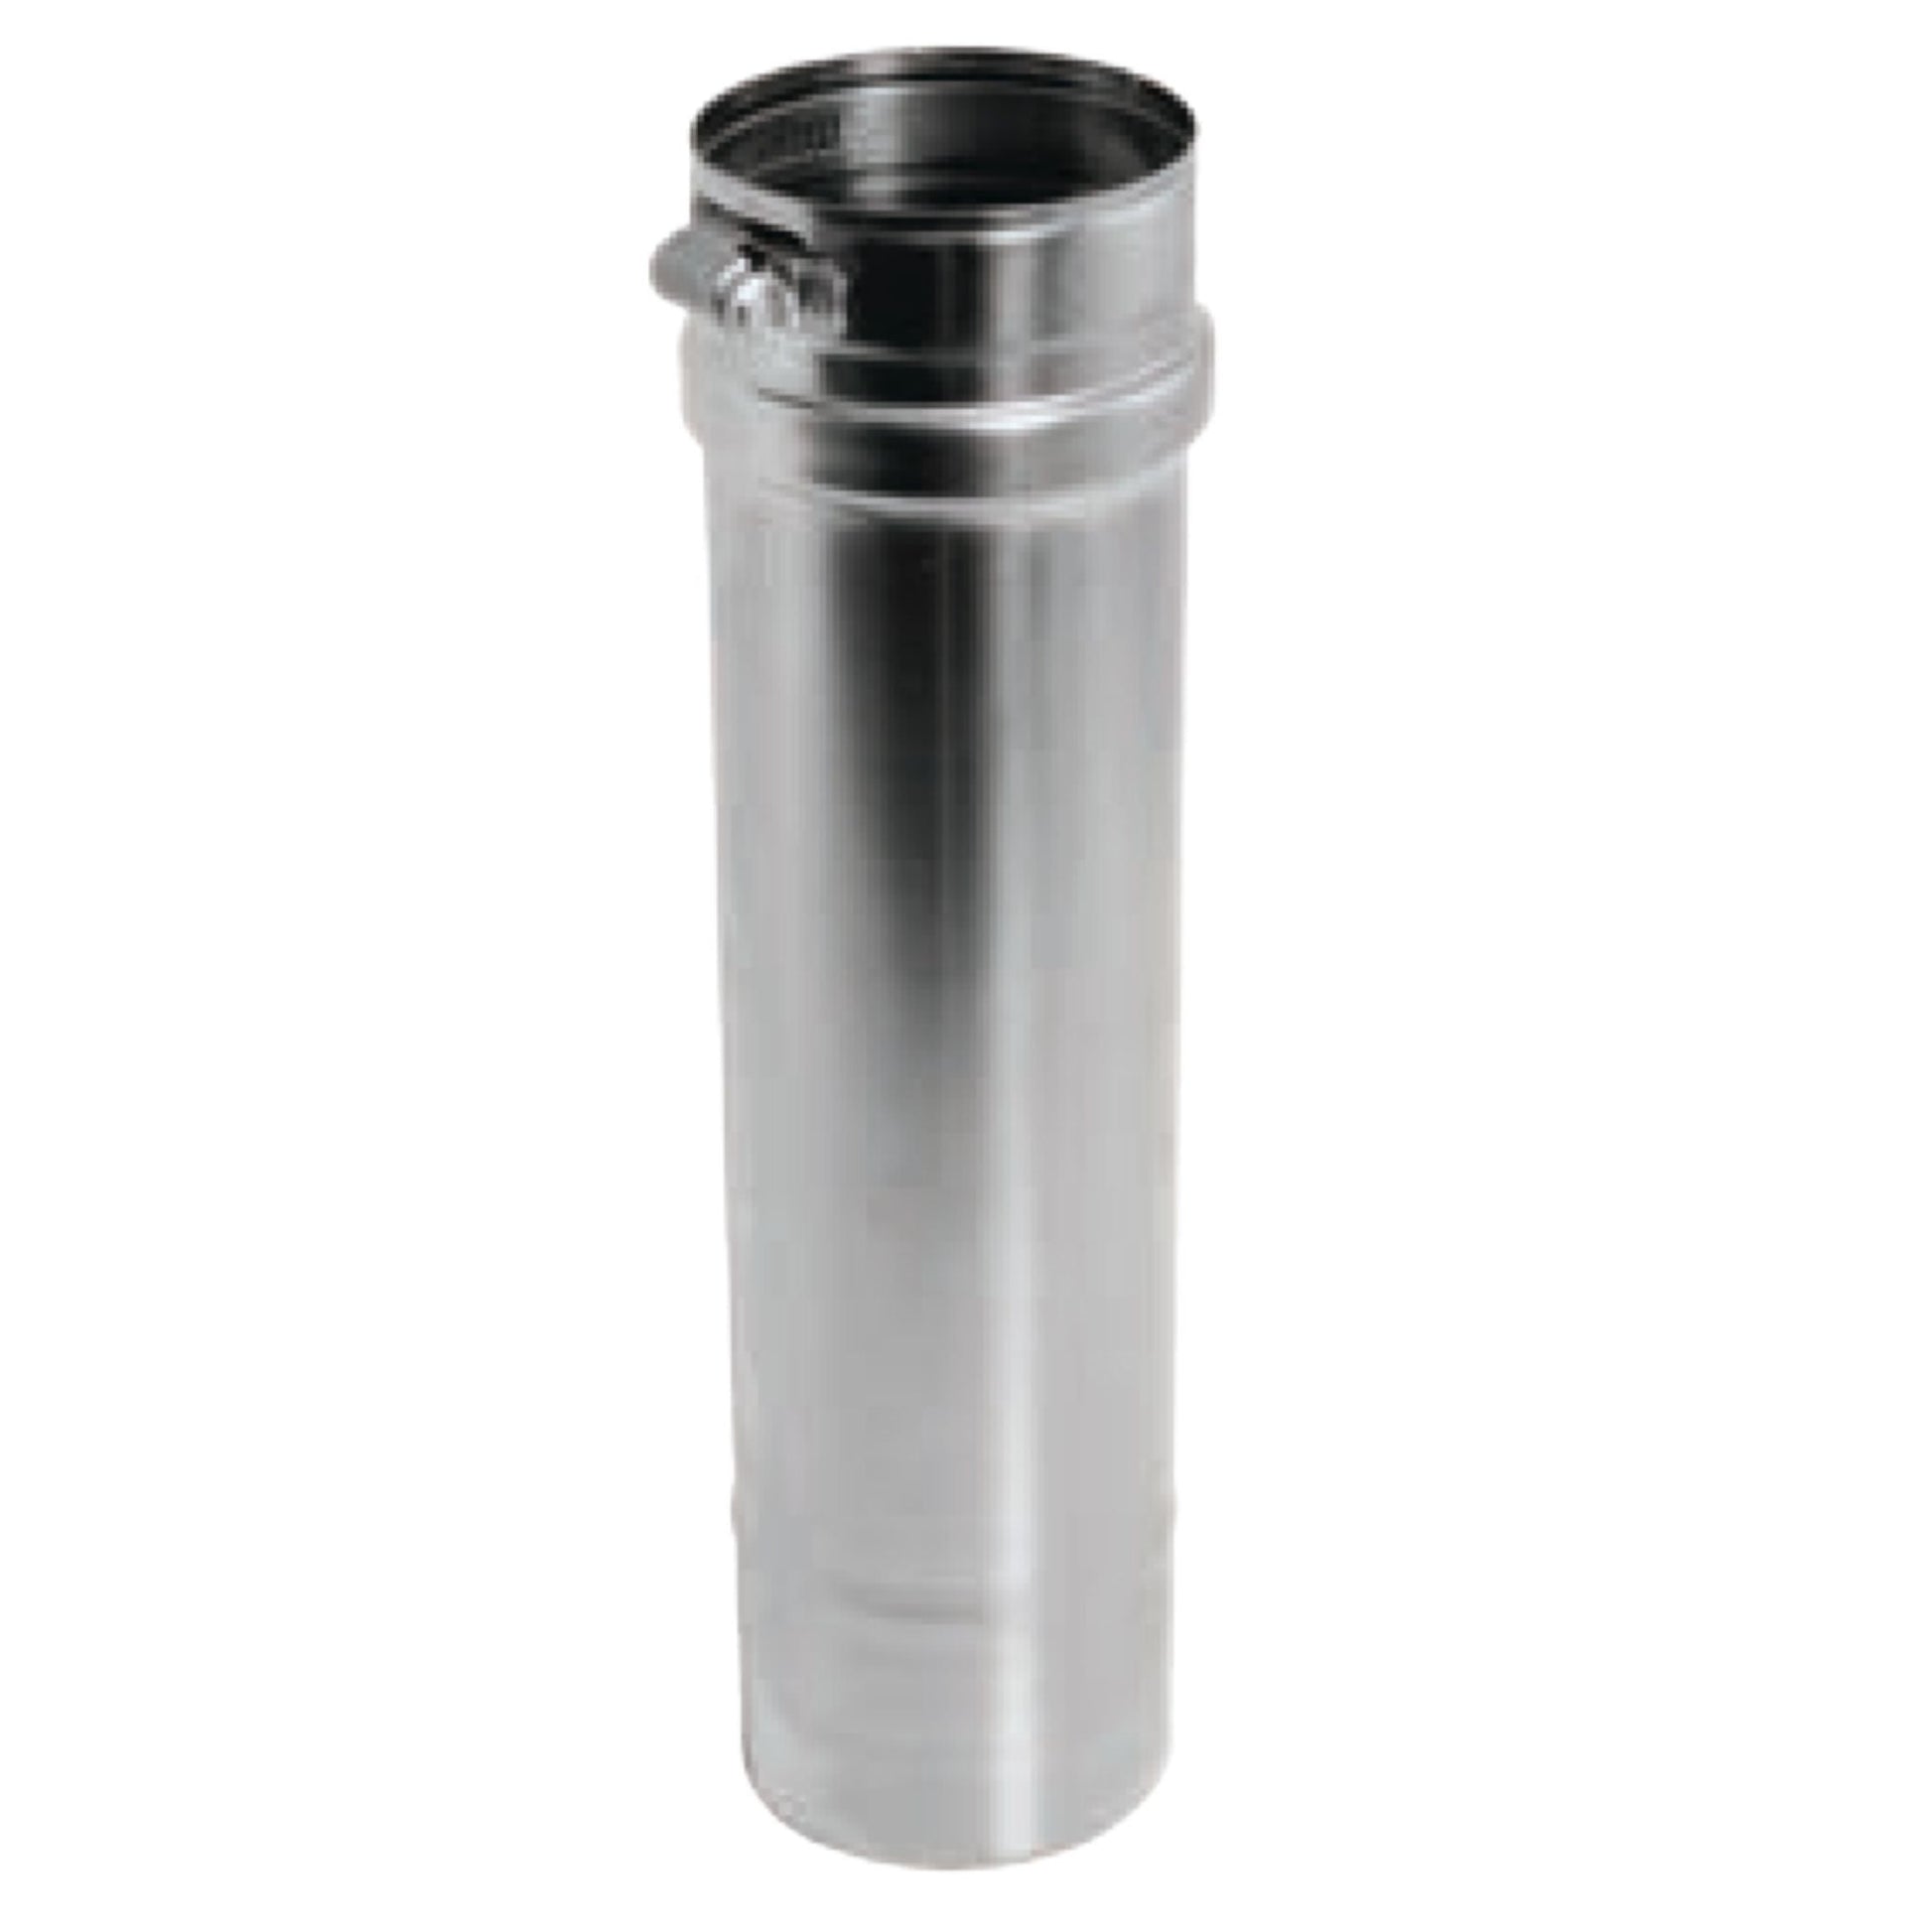 DuraVent FasNSeal 3" x 12" 316L Stainless Steel Vent Length